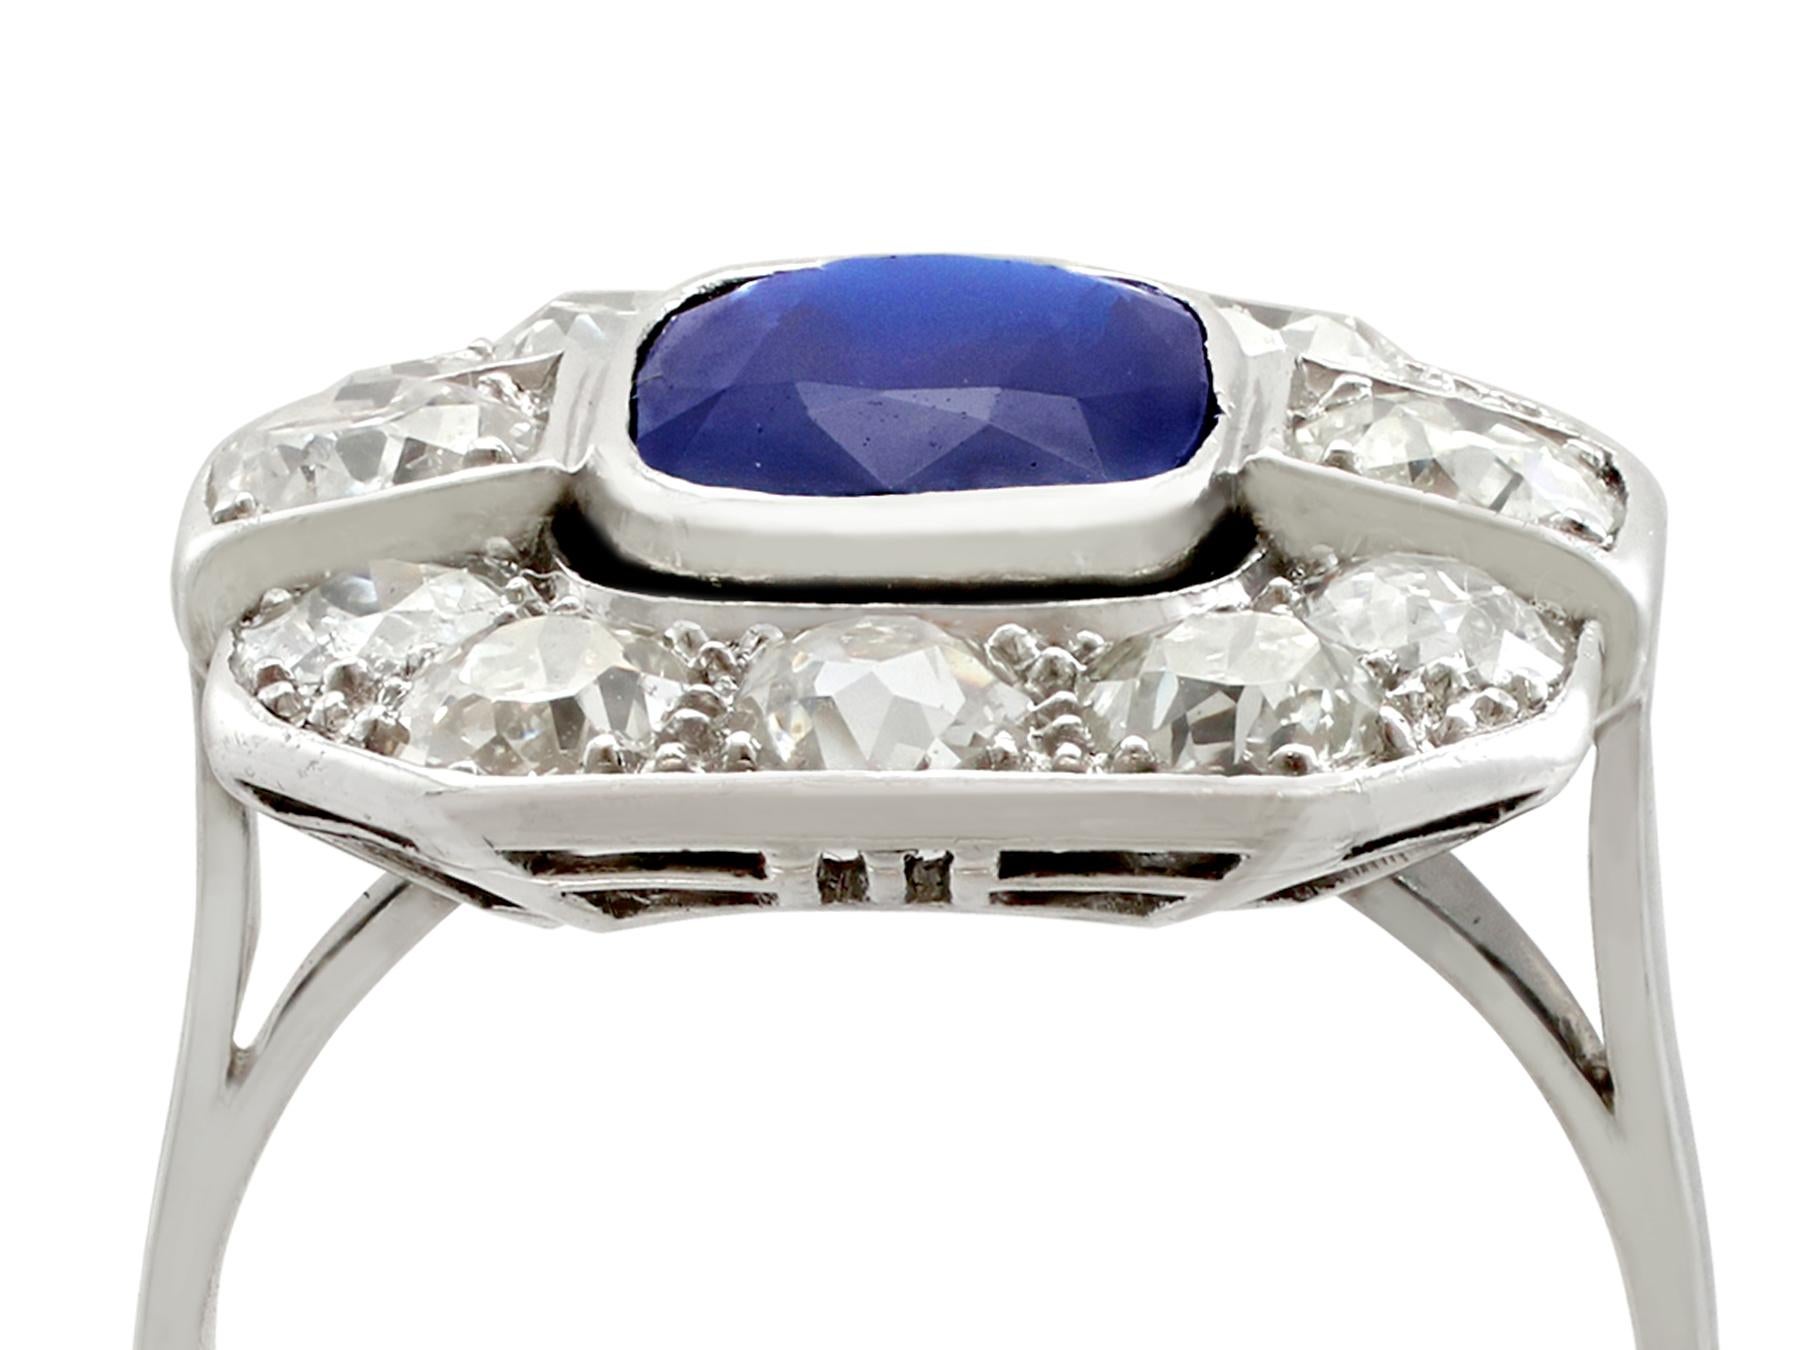 A stunning antique 2.62 carat Basaltic sapphire and 2.85 carat diamond, 18 karat white gold and platinum set cluster ring; part of our diverse antique jewelry and estate jewelry collections

This stunning, fine and impressive 1930s sapphire and